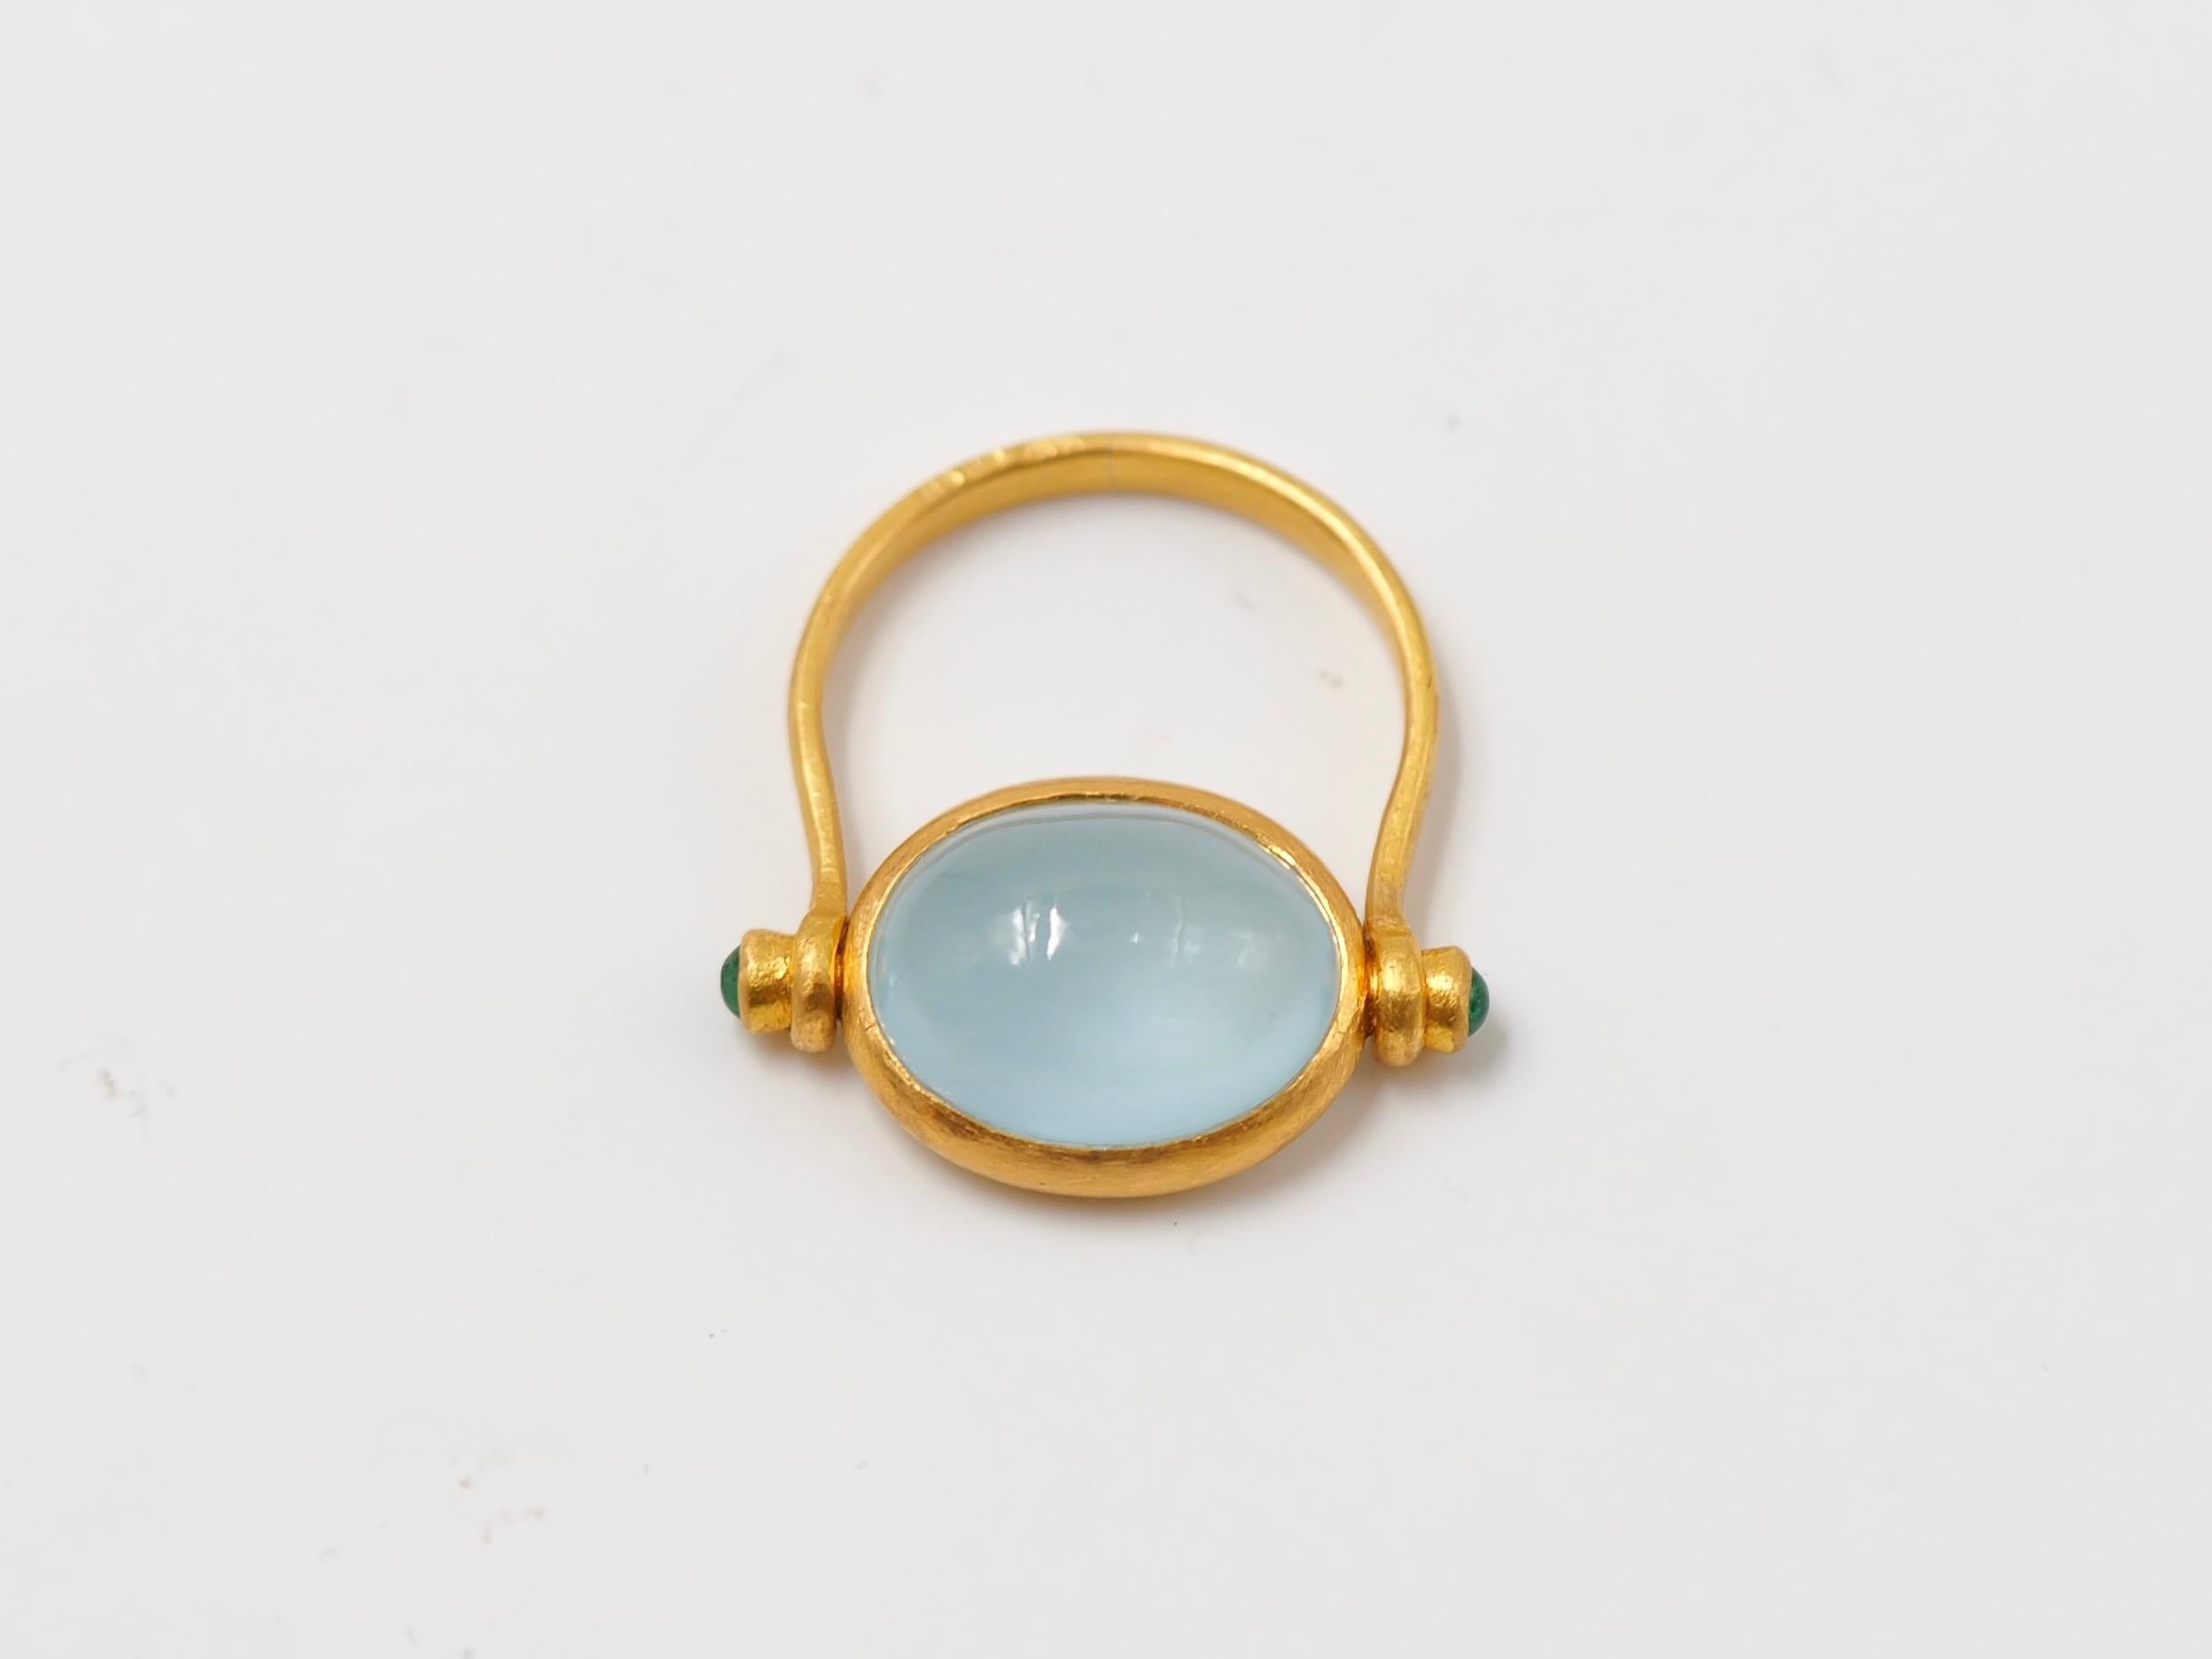 This antique style ring by Scrives is set with a luminous opaque aquamarine cabochon of 5.21 cts and 2 small emerald cabochons (0.15 cts) on the side of the aquamarine. 
The central stone and its setting are turning in order to give more comfort.